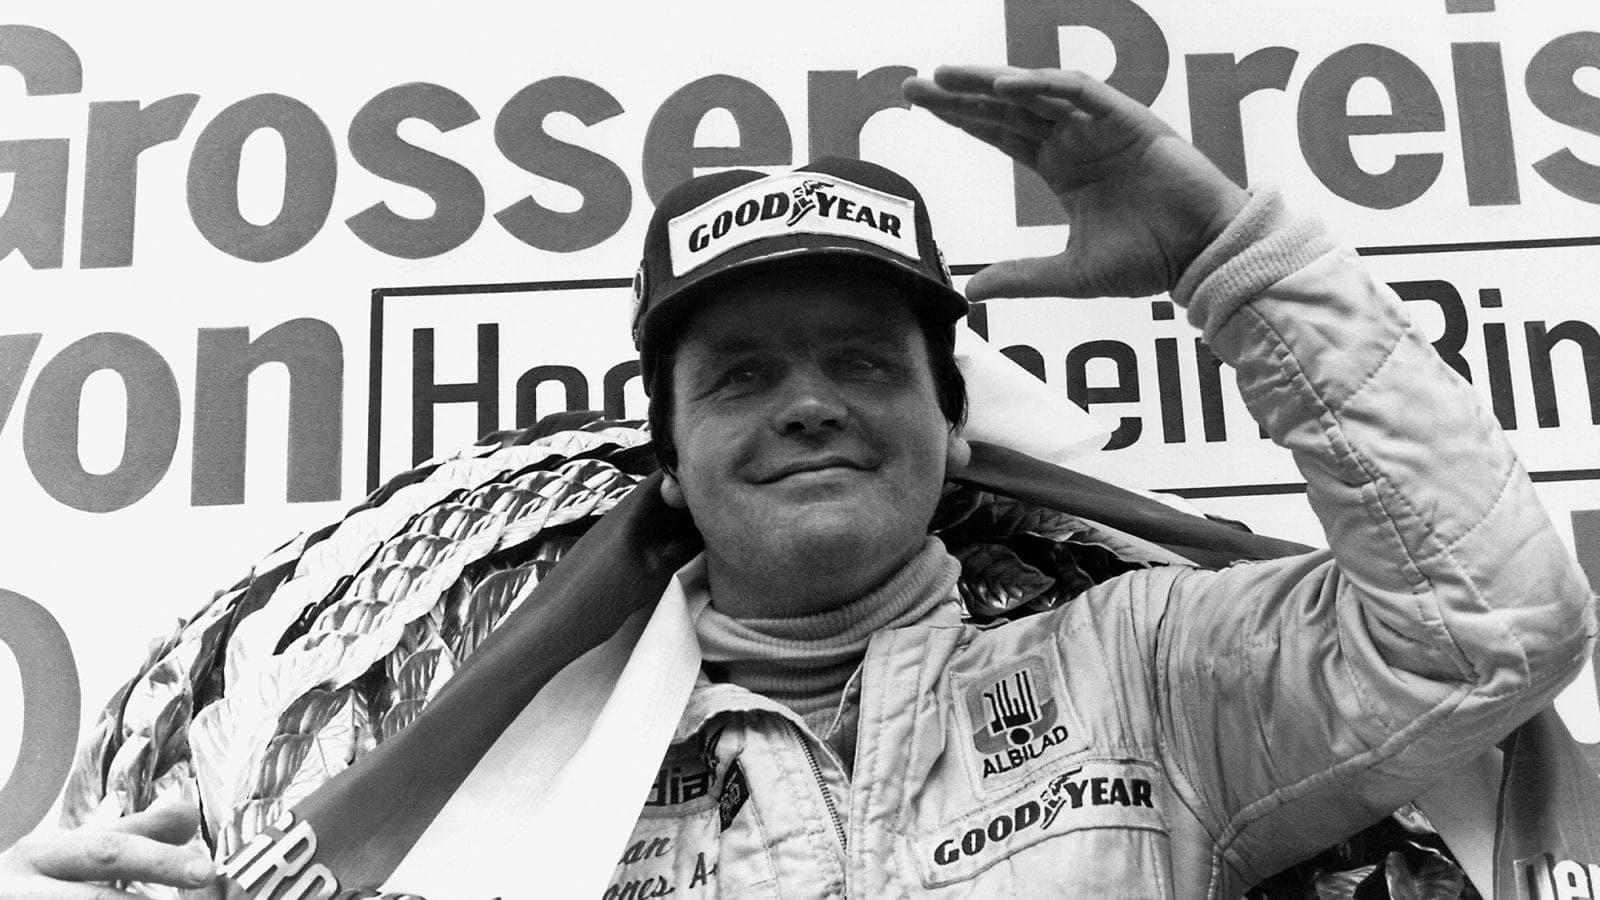 Alan Jones on the podium for Williams after the 1979 F1 German Grand prix